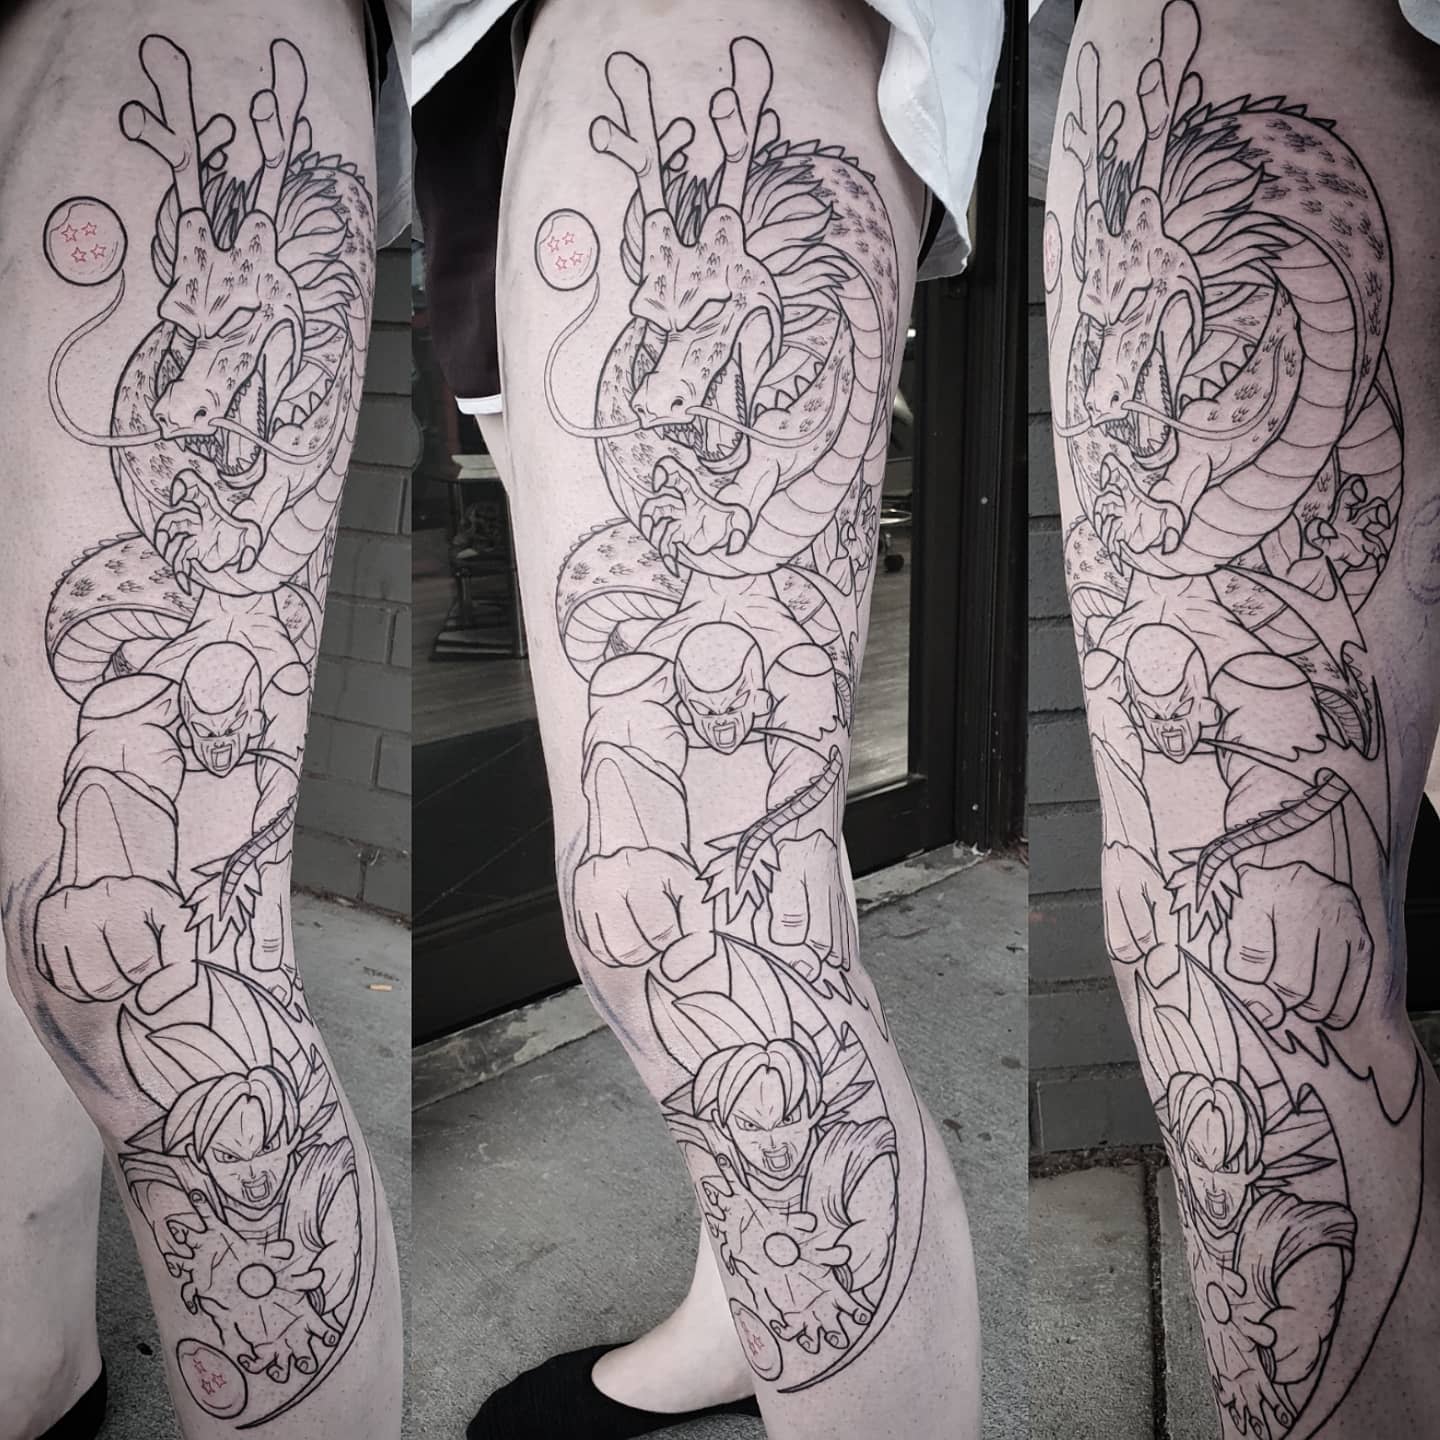 The Top 39 Shenron Tattoo Ideas - [2021 Inspiration Guide]